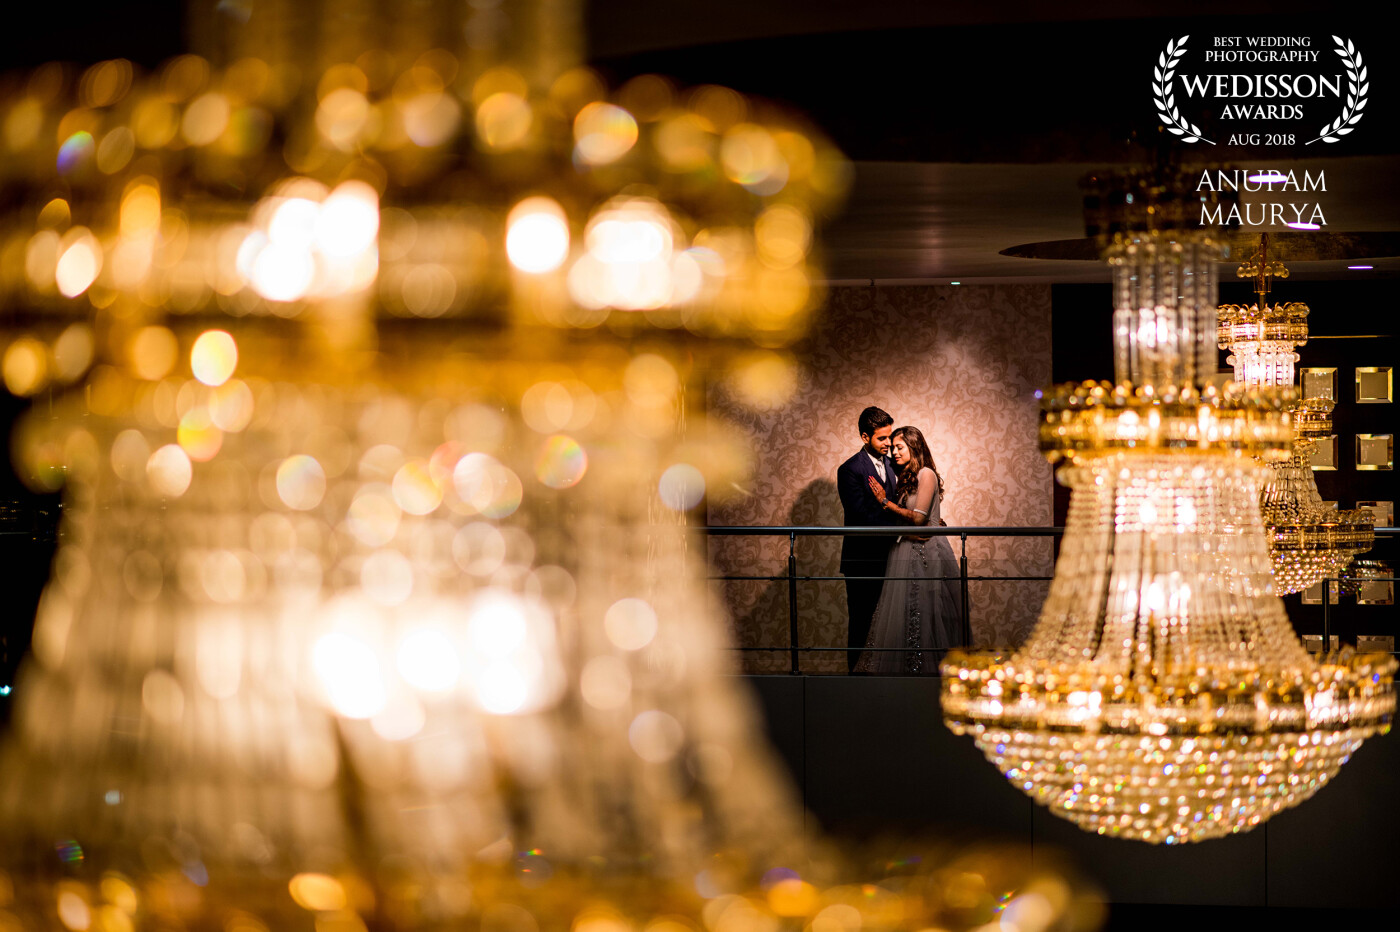 The chandeliers in this property were spectacular and I instantly knew I would want to do something with it during the couple shoot.  The couple had no clue what I was going to shoot from that being 50 mtrs away from them and when they finally saw the image, they were ecstatic. 